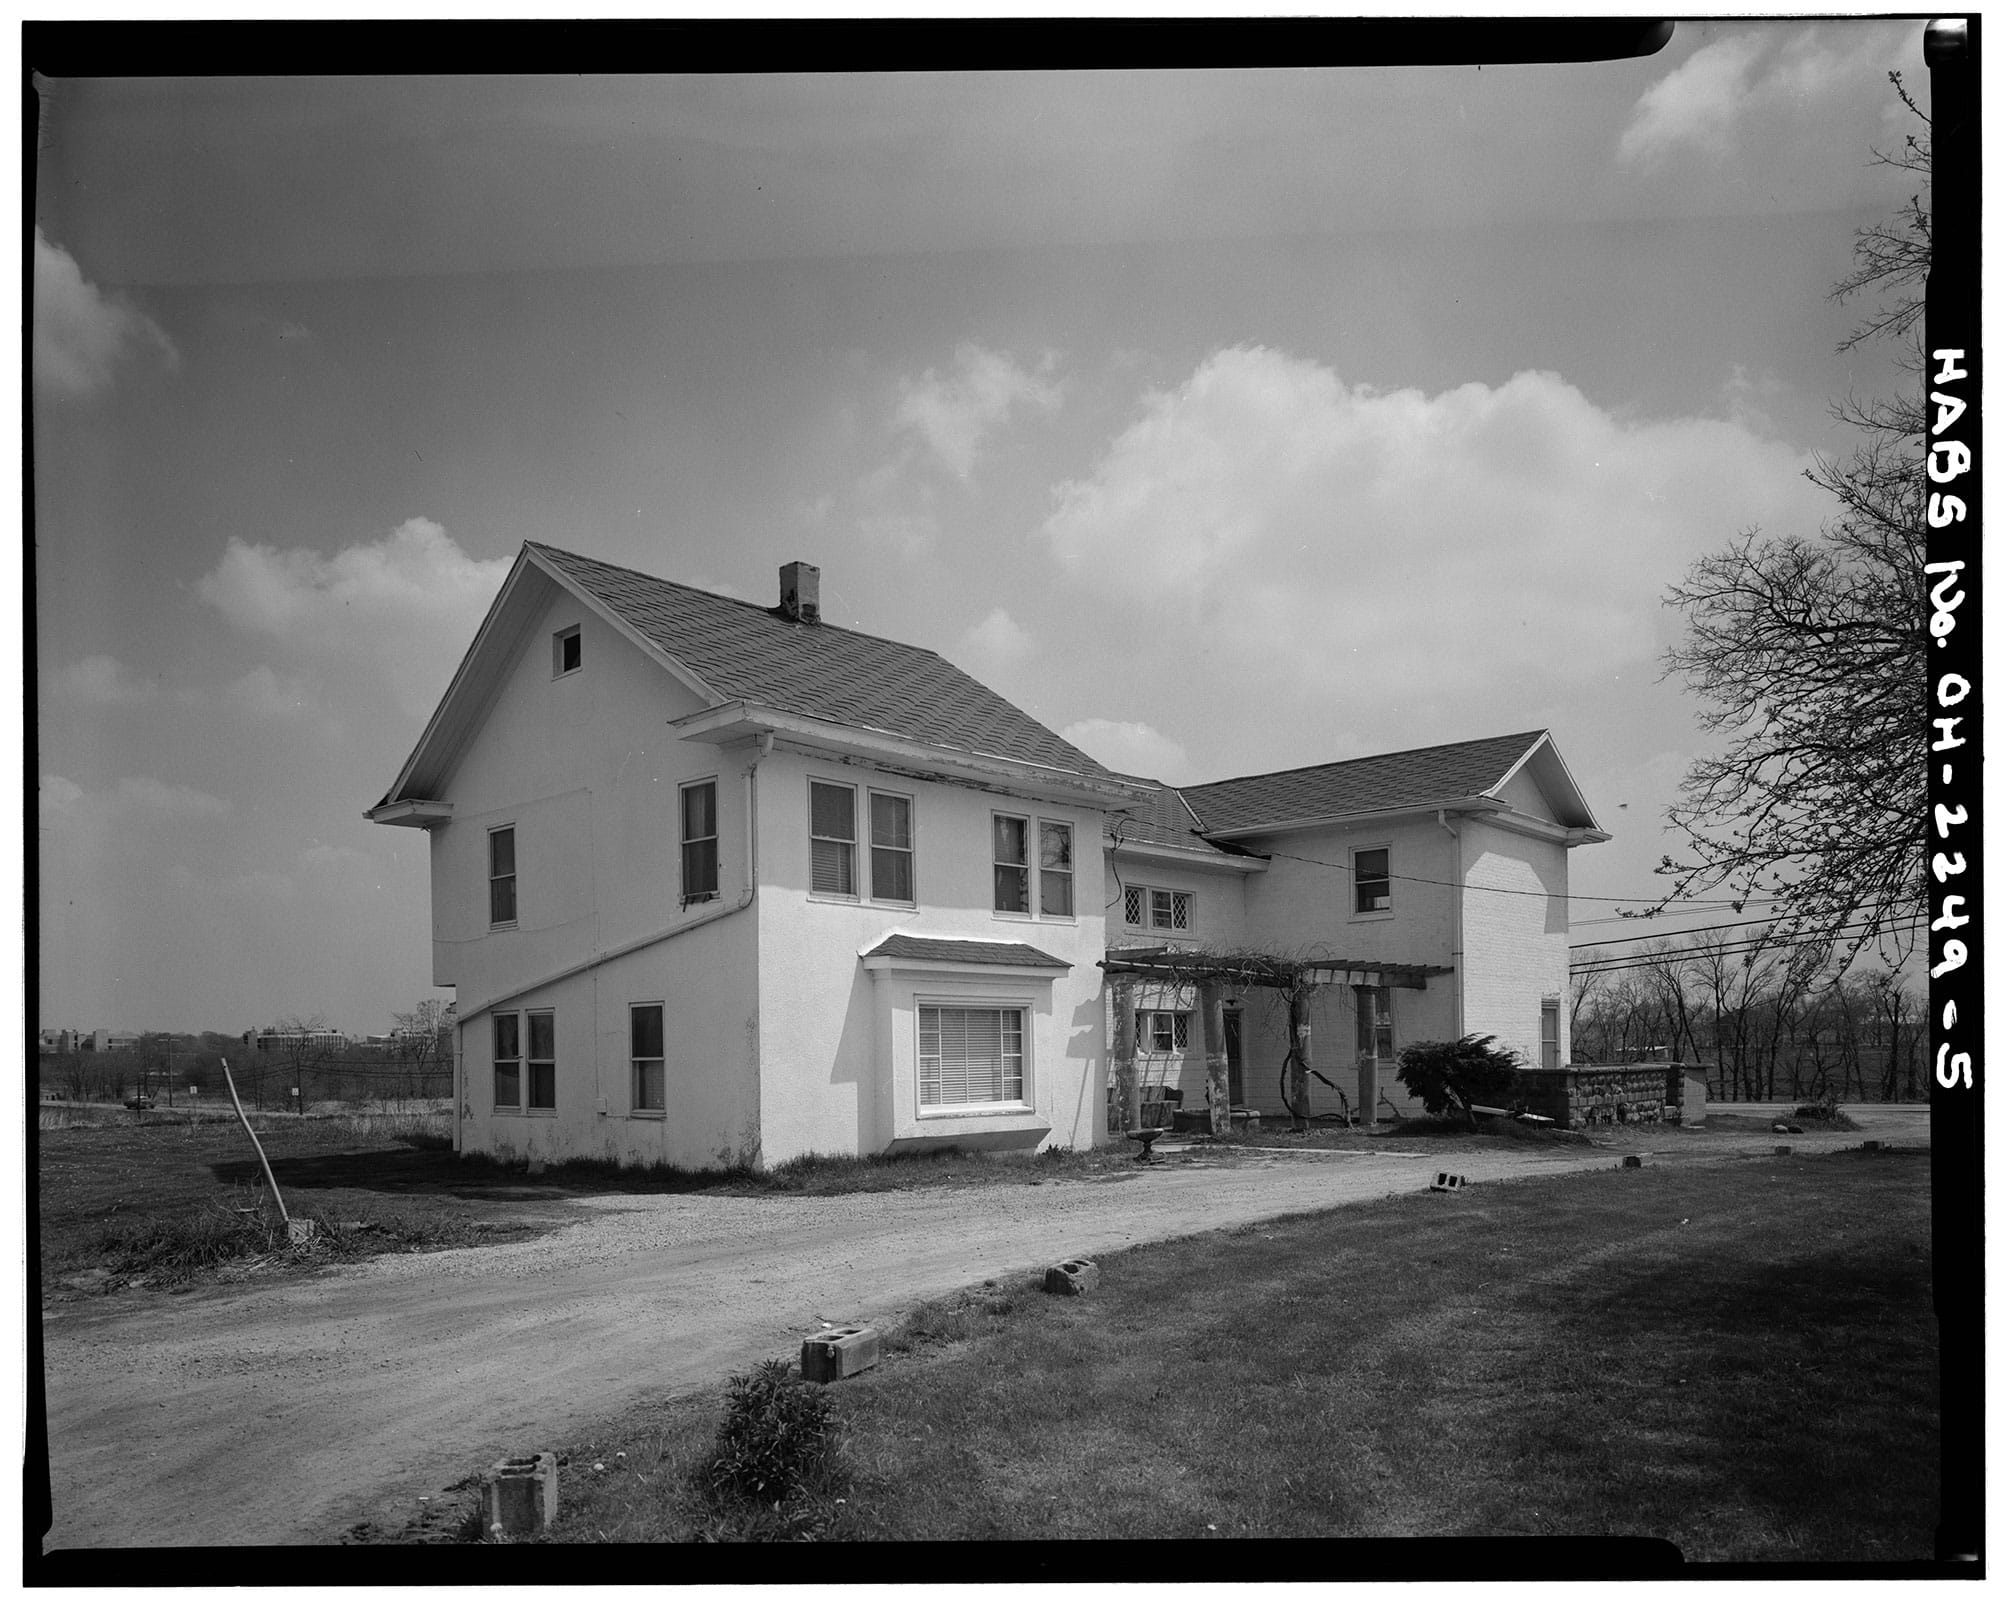 An old black and white photo of a house.